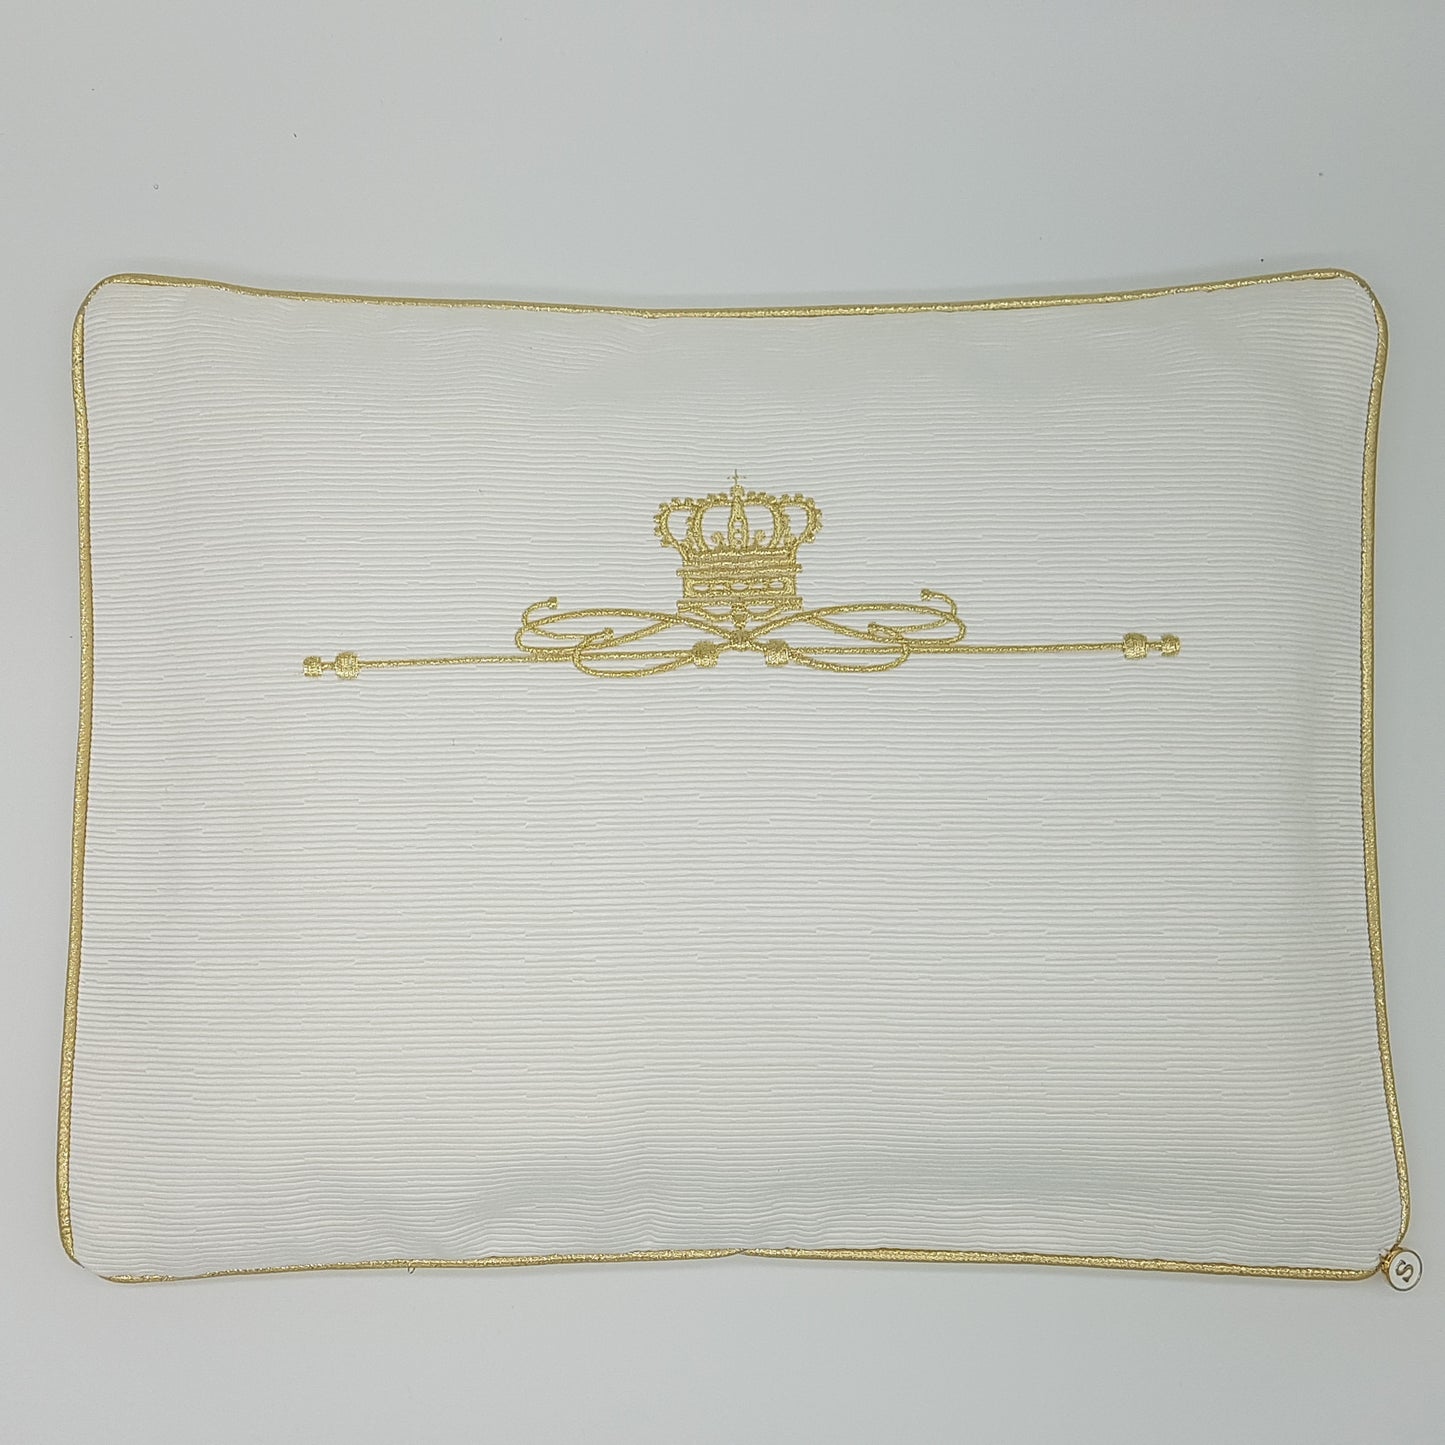 'On the Throne' 2pc Bassinet Sheet Set, Gold on Ivory